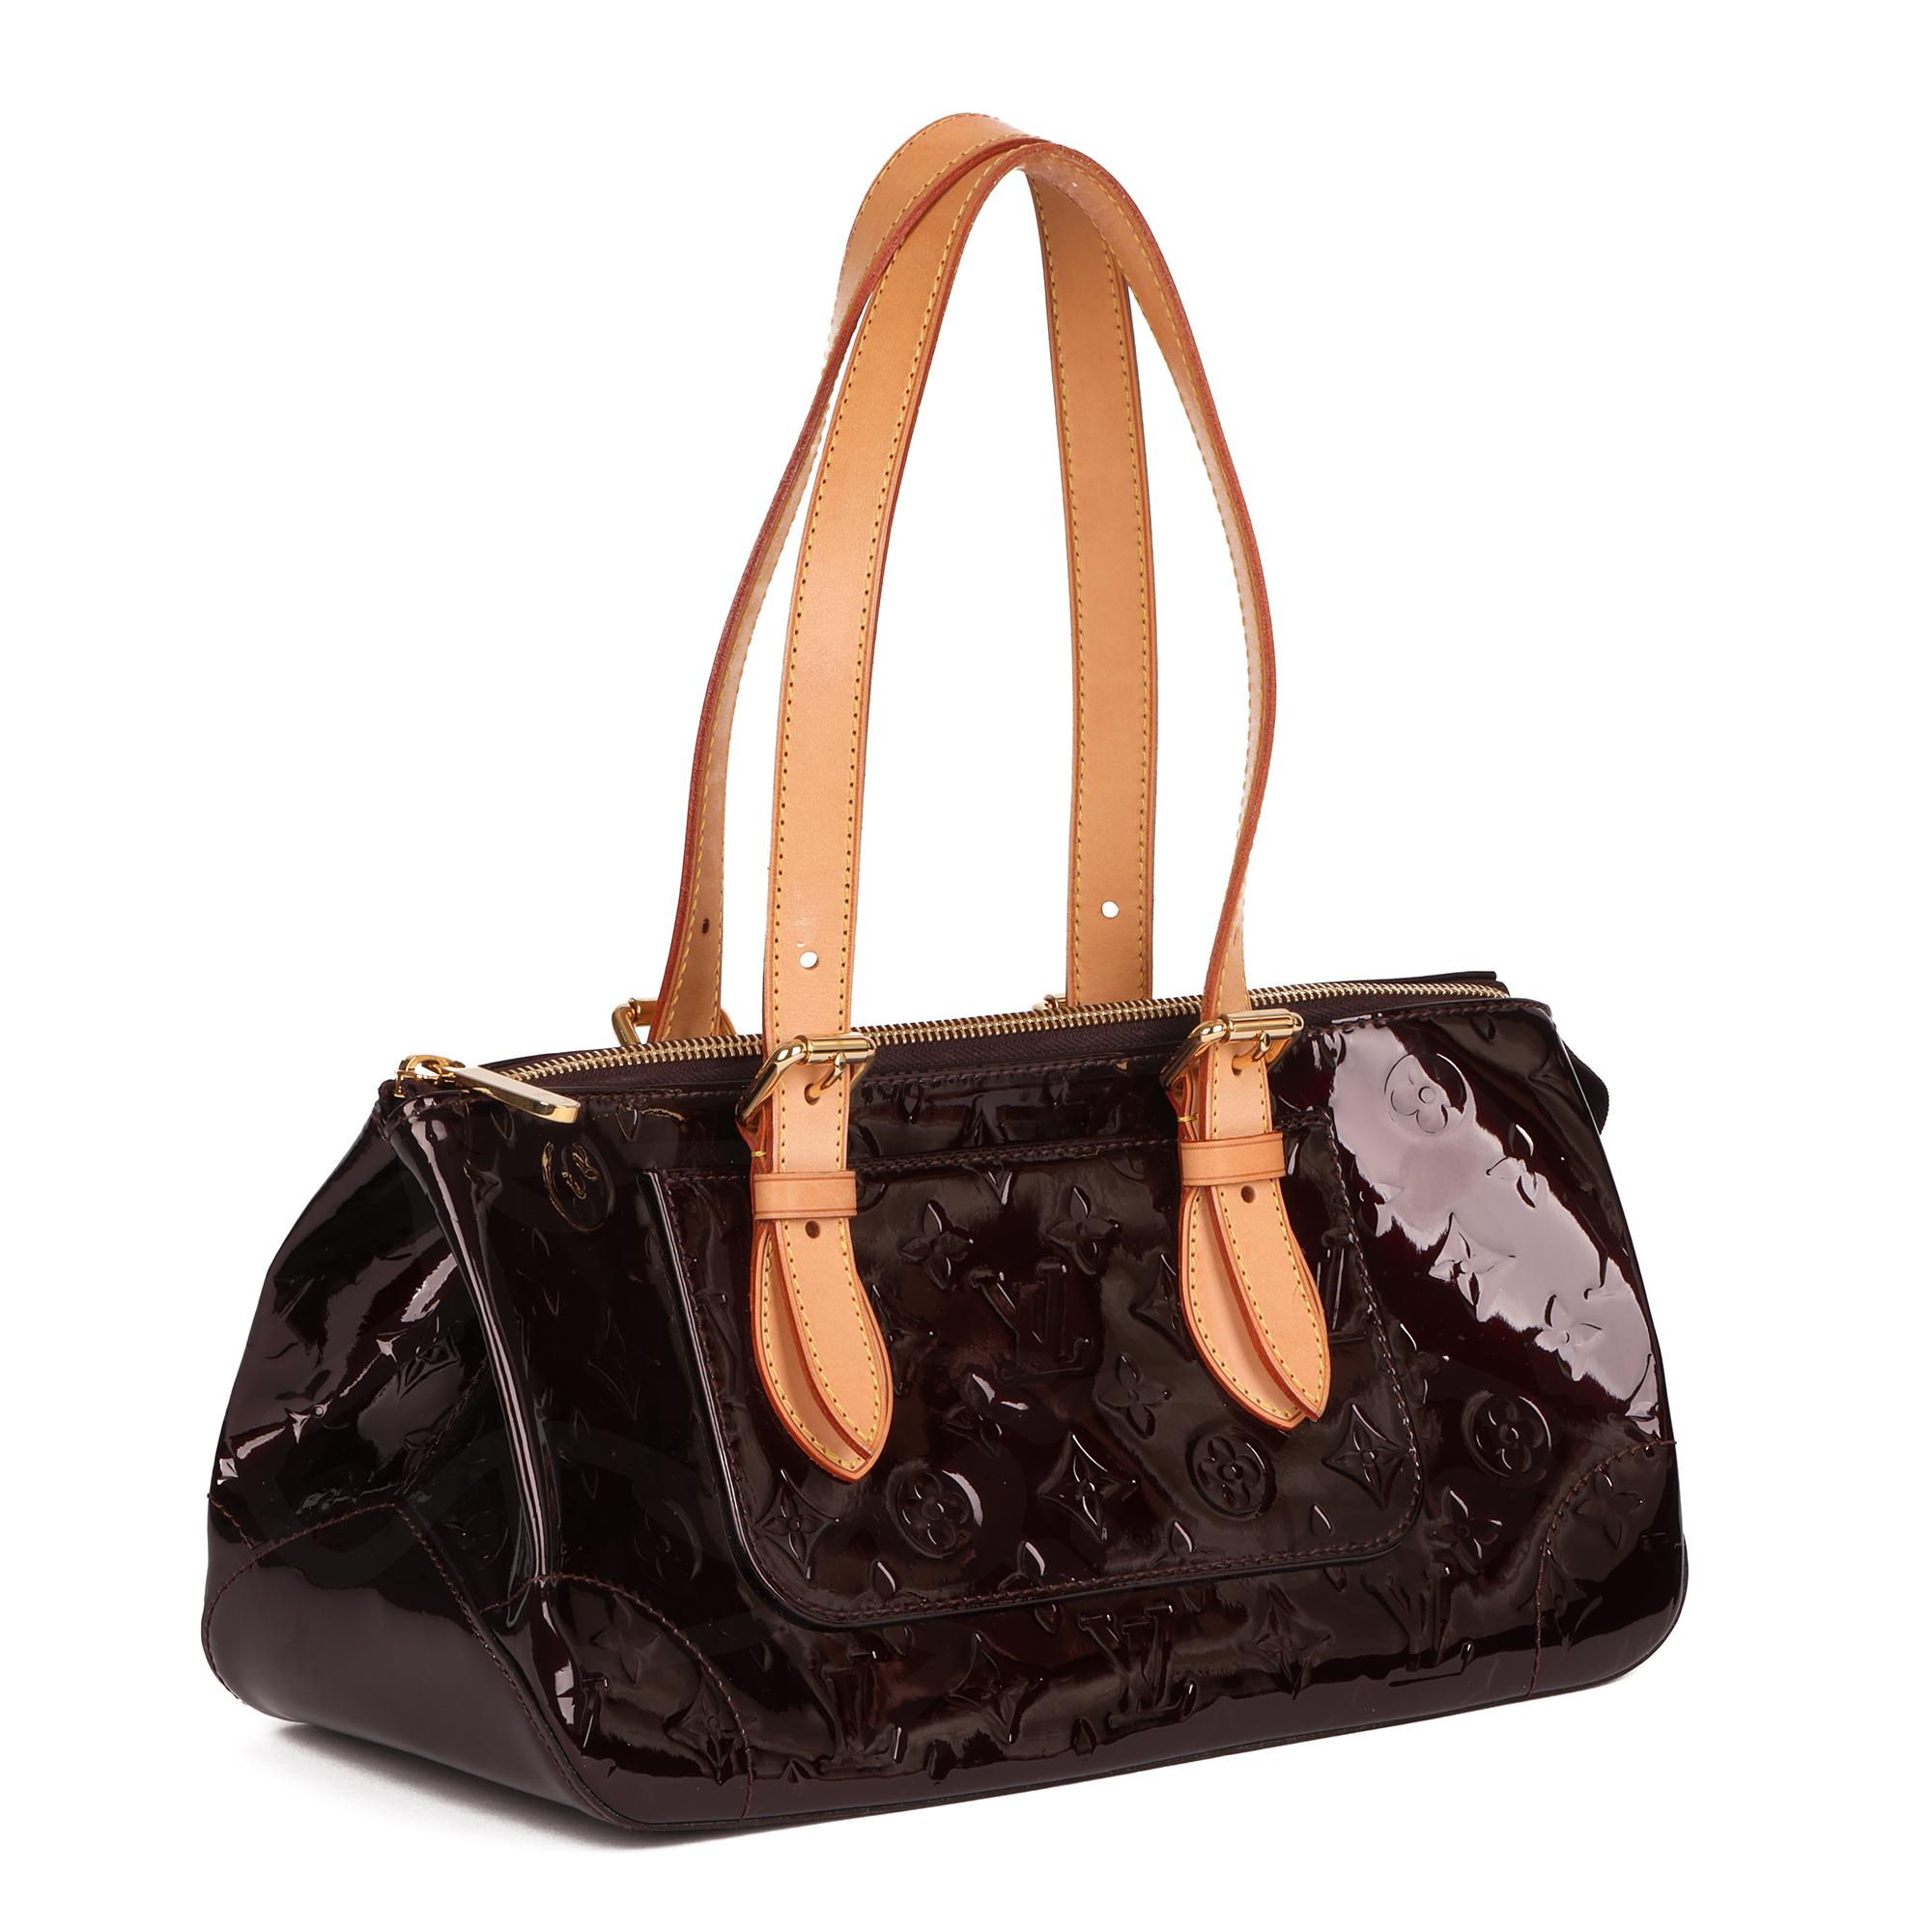 LOUIS VUITTON
Amarante Vernis Leather & Vachetta Leather Rosewood Avenue

Xupes Reference: CB485
Serial Number: FL4057
Age (Circa): 2007
Accompanied By: Louis Vuitton Dust Bag
Authenticity Details: Date Stamp (Made in France)
Gender: Ladies
Type: